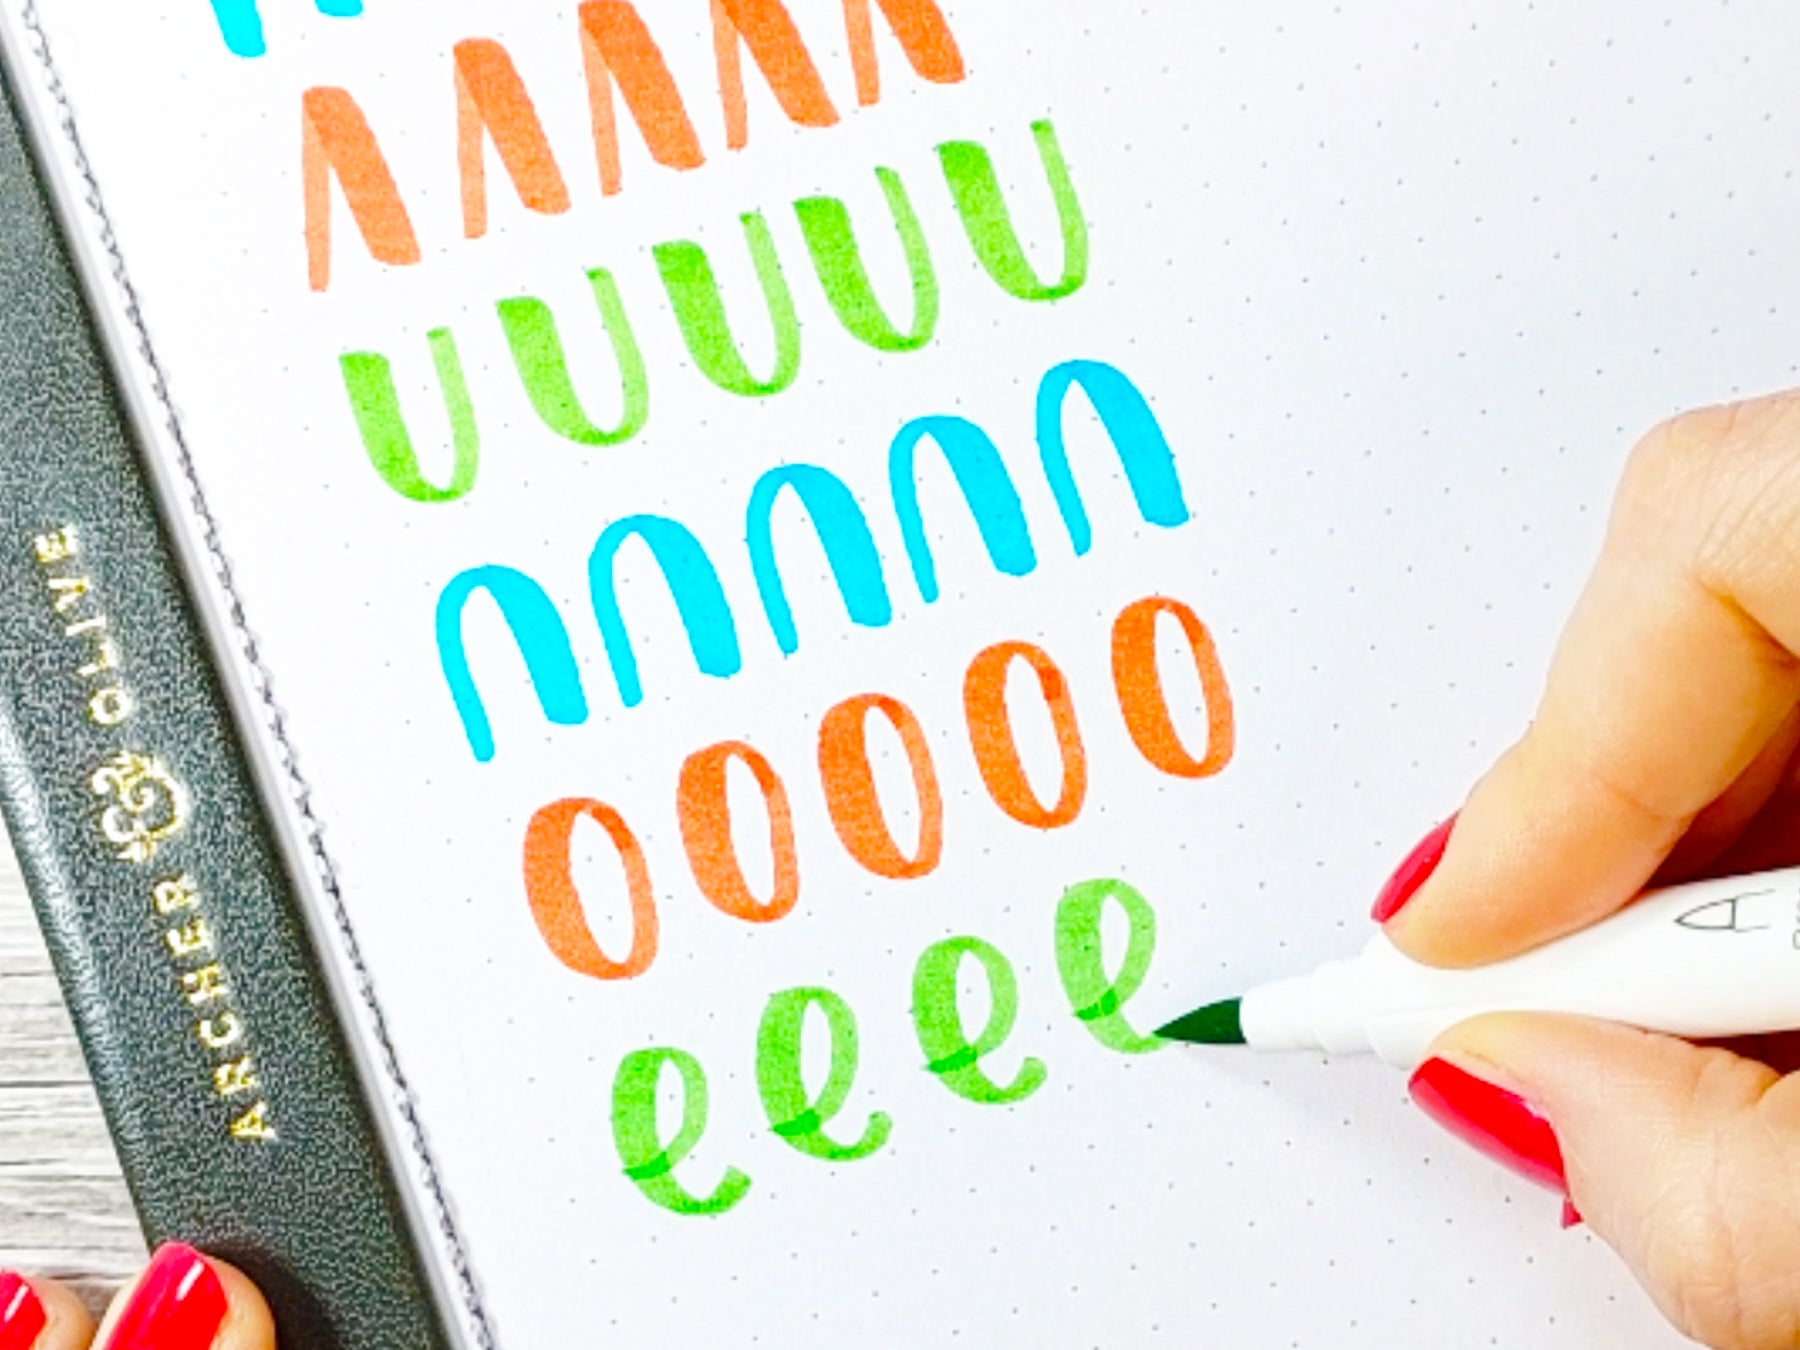 How to Do Crayola Calligraphy - Letter With What You Have